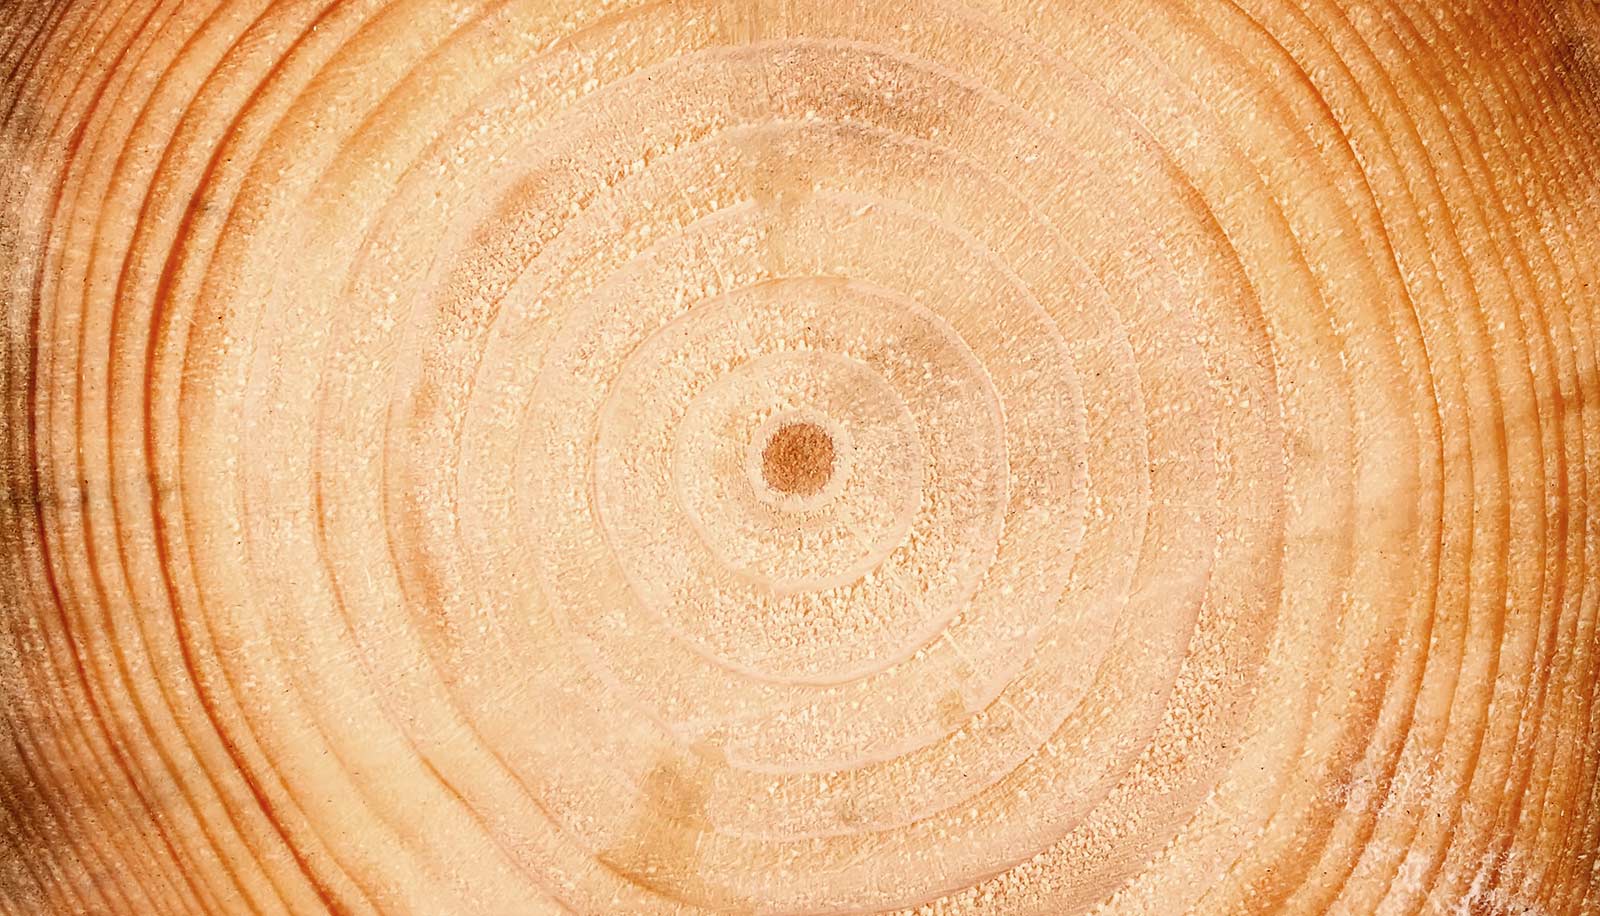 Close-up of the annual rings of a Swiss stone pine's trunk